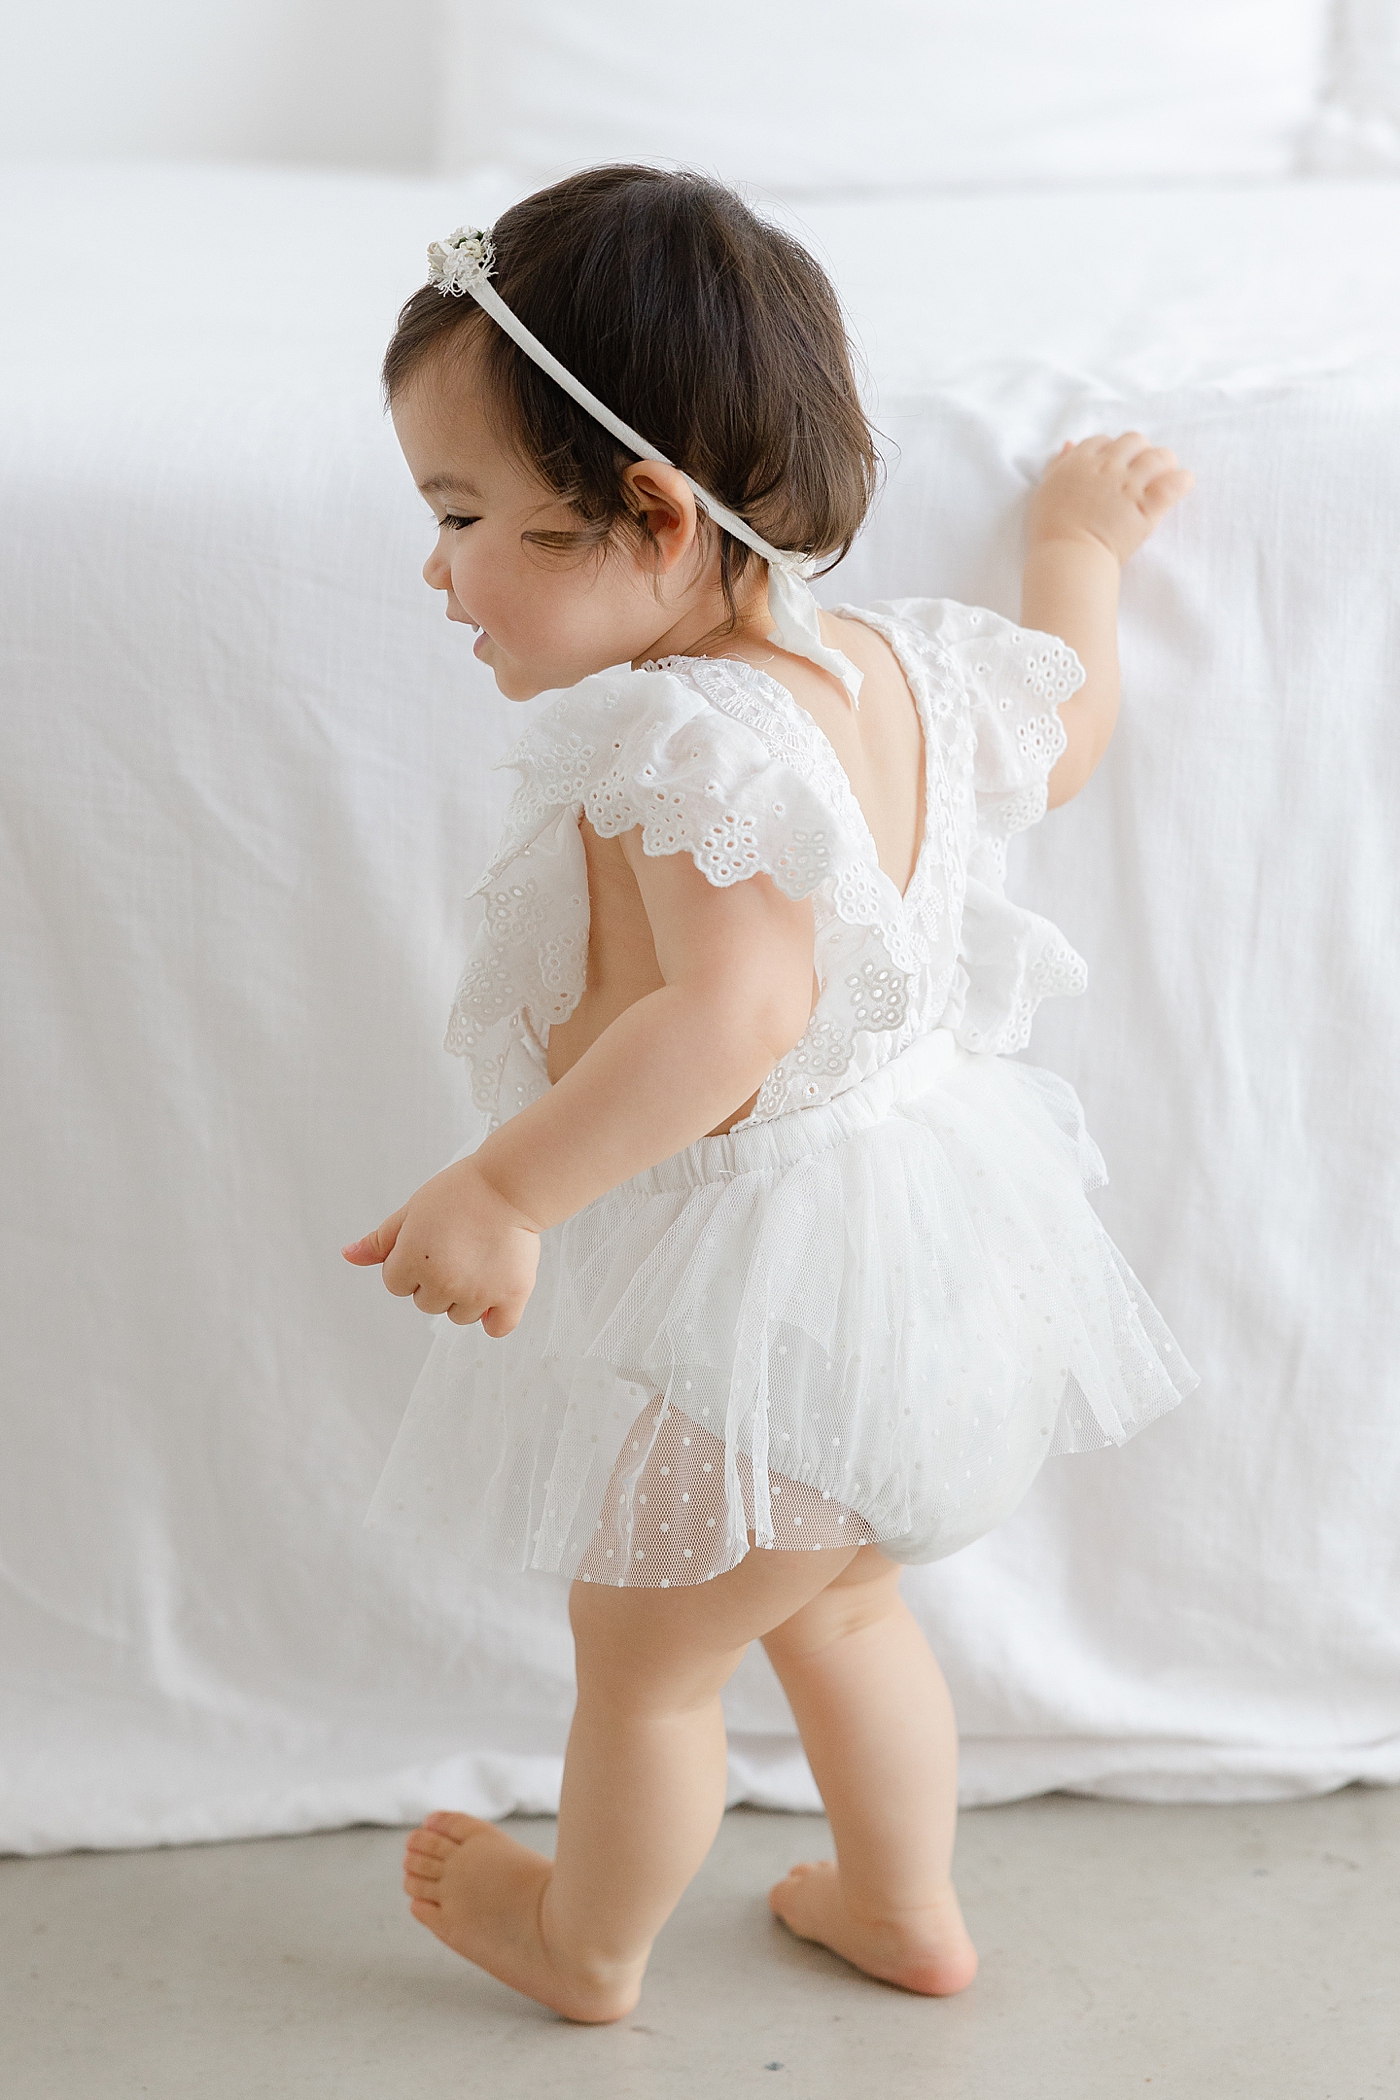 Baby girl in a white dress and headband standing | Image by Sana Ahmed Photography